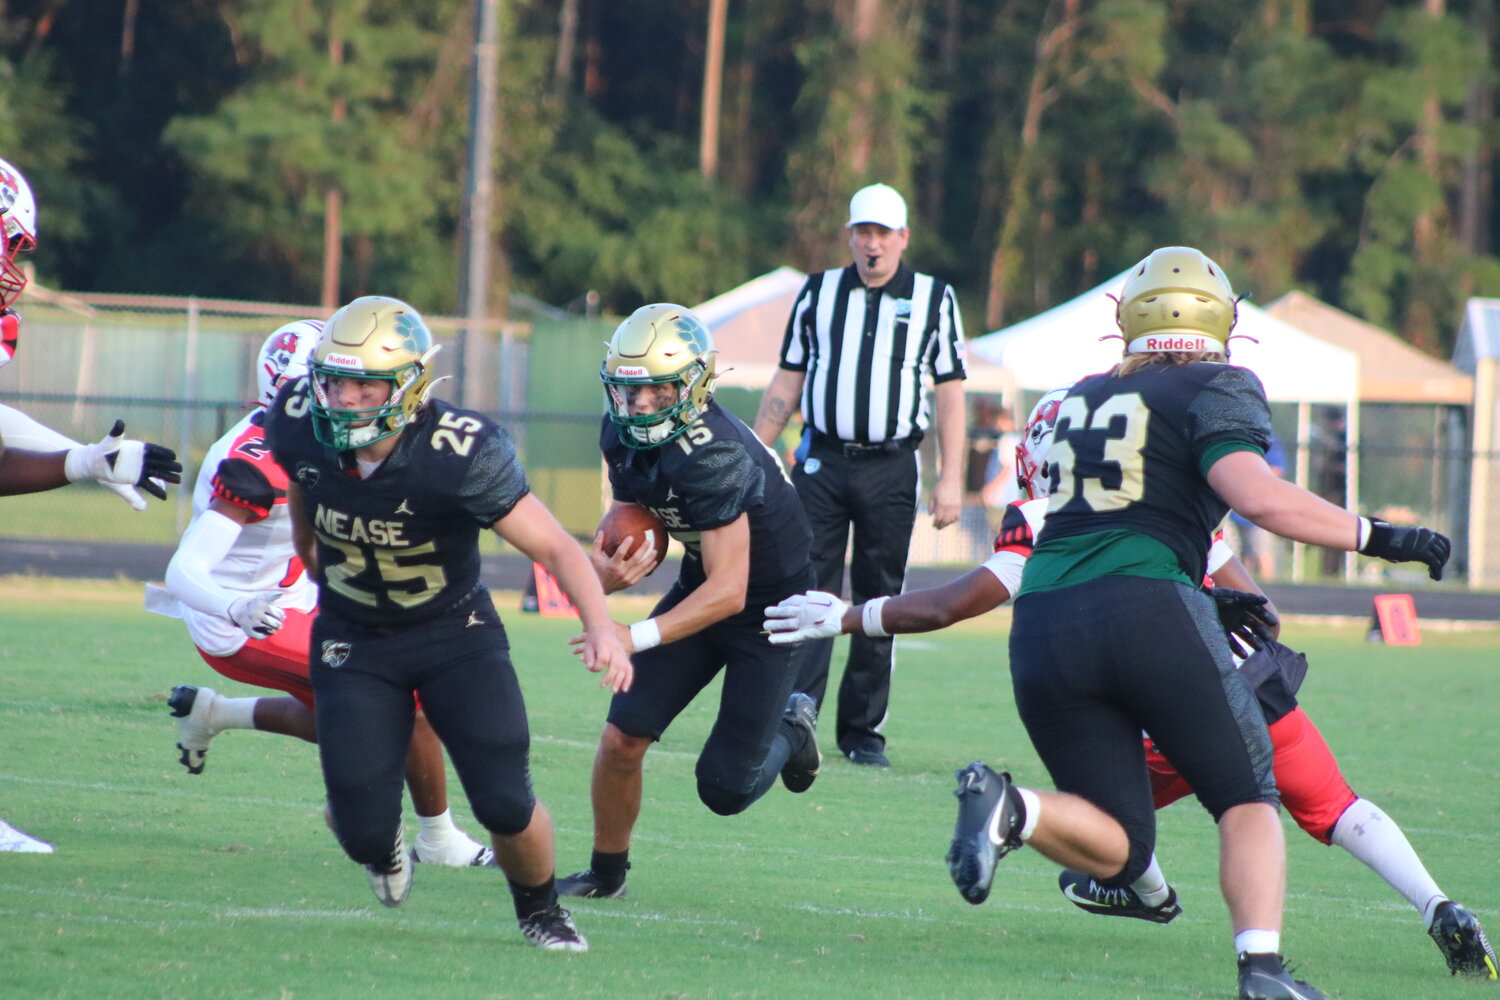 Nate Harry (No. 15) leads the offensive attack against Fletcher on Sept. 15.